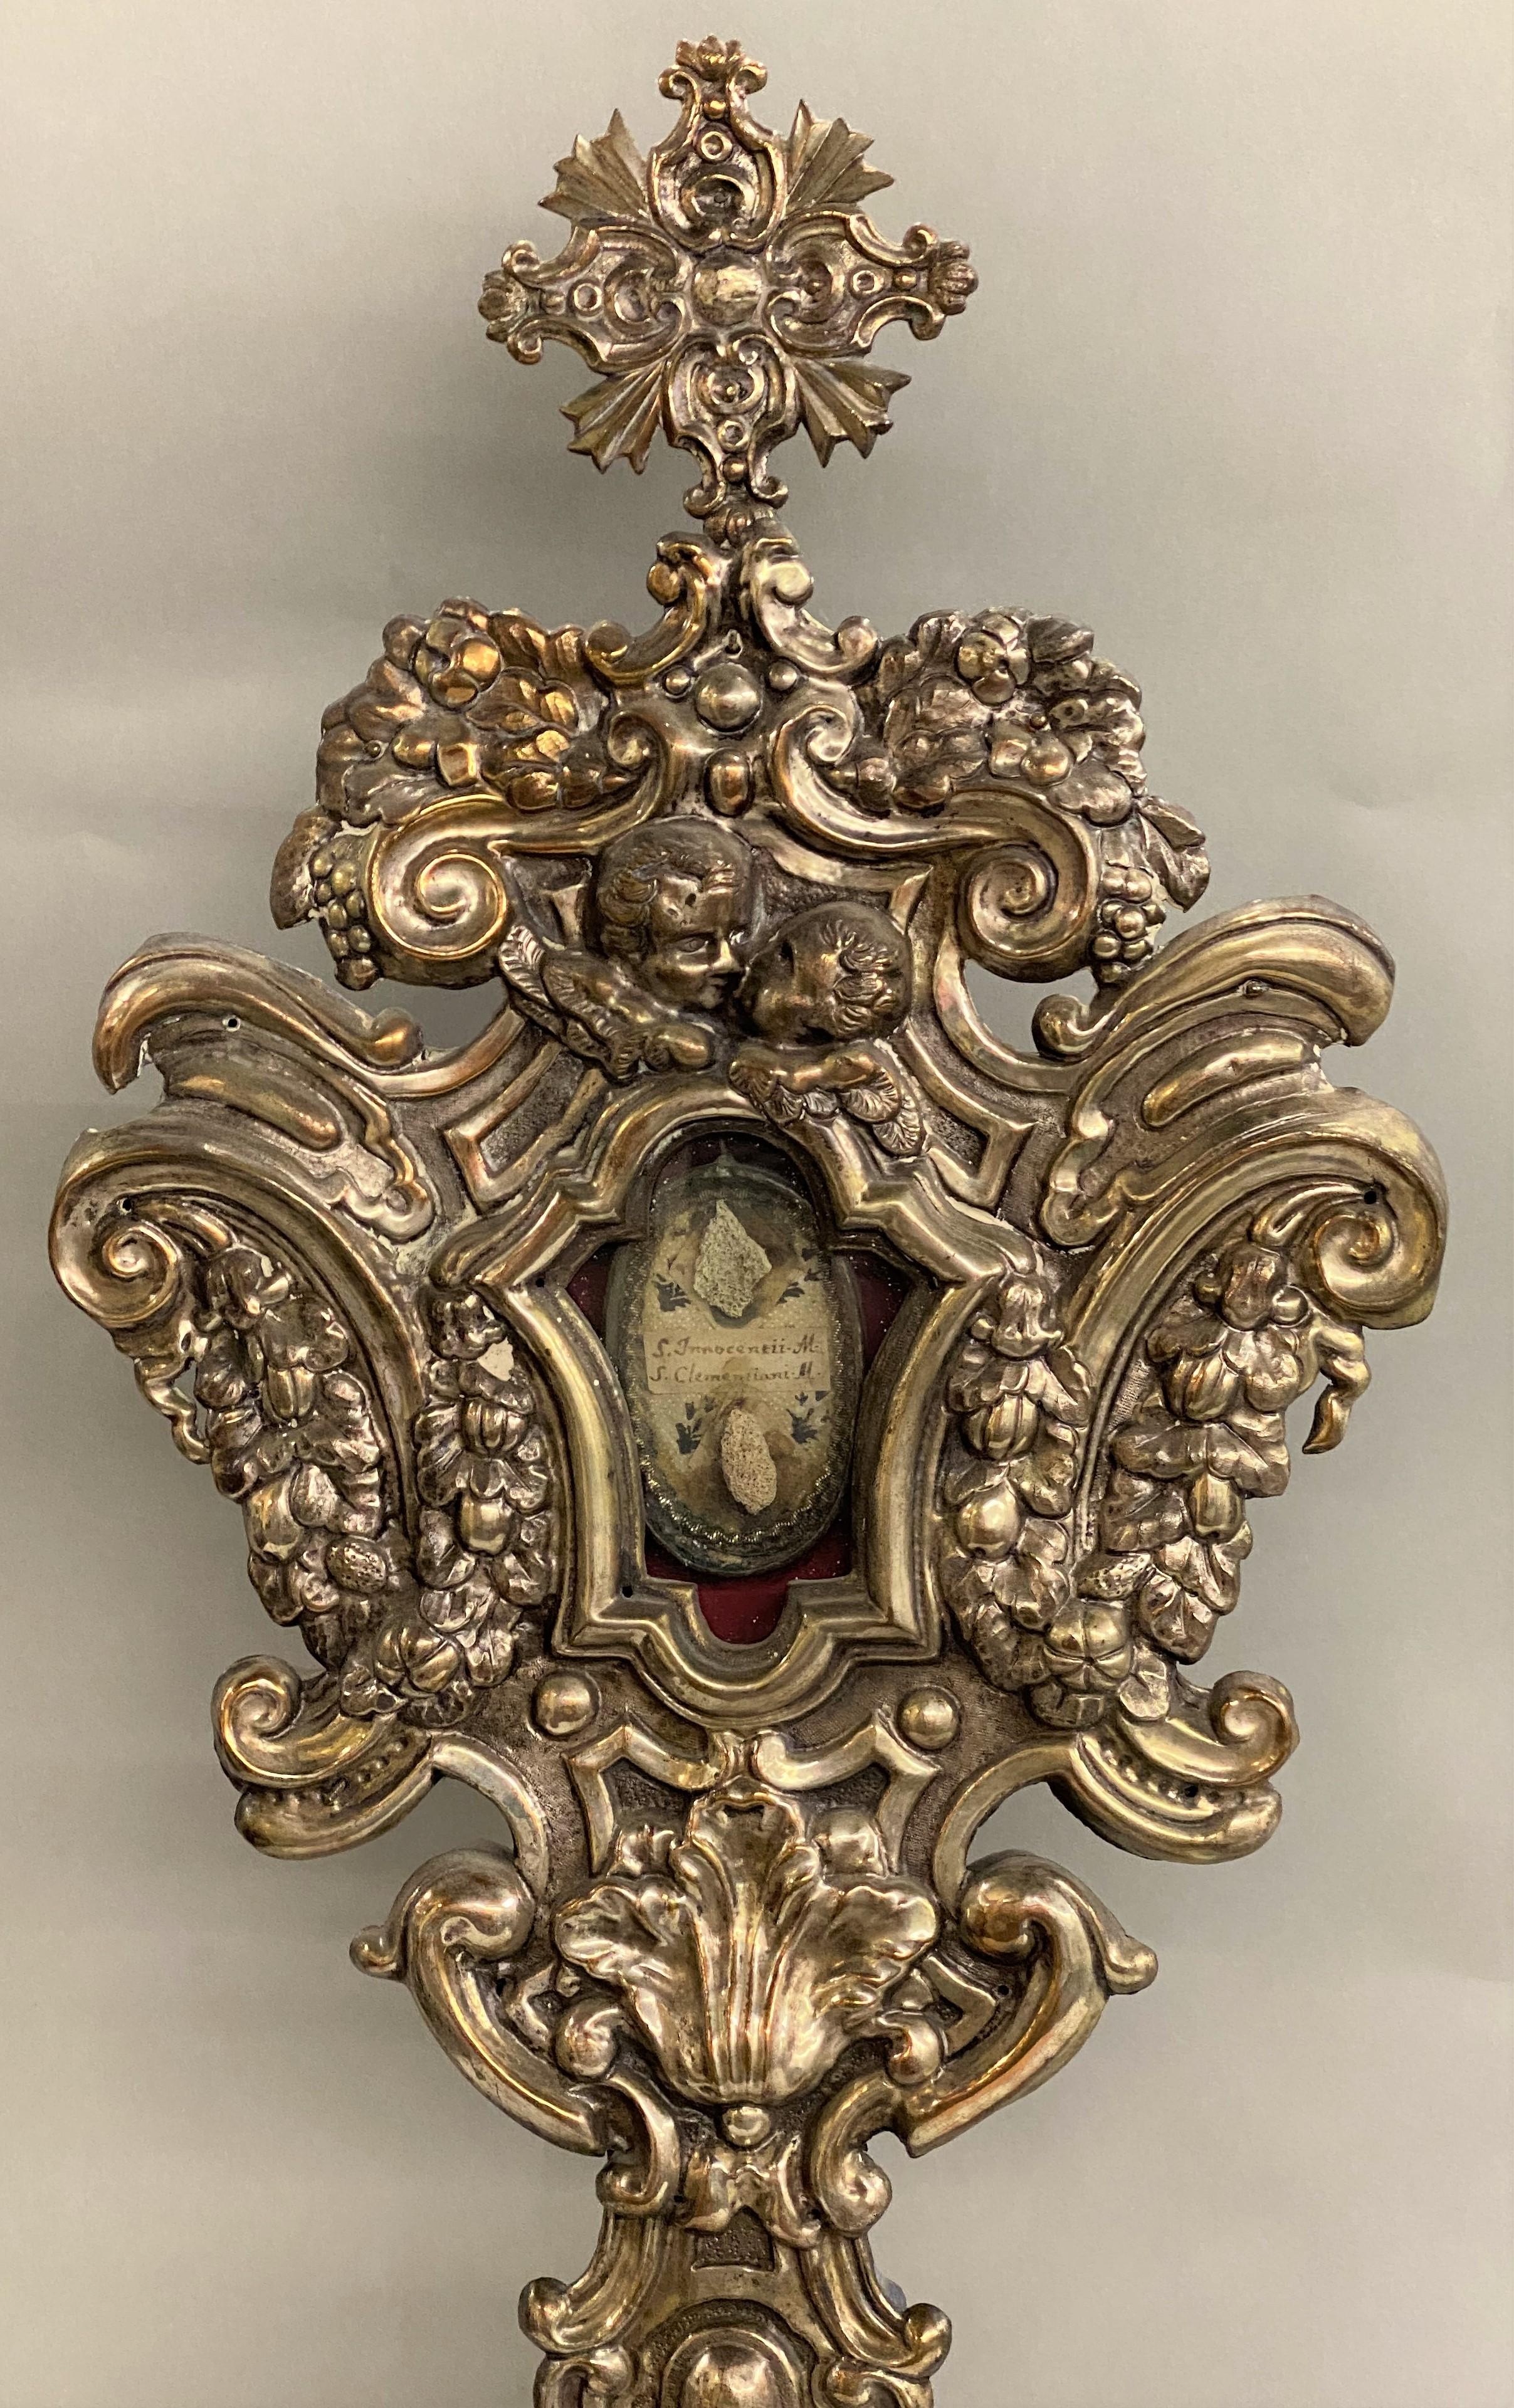 A fine large pair of Italian silvered metal over wood reliquaries with putti, grape, shell, and scrollwork design. Each have memorial pendant displays with names (The left reads S. Innocentii M & S Clementiani M,” while the other is illegible. The